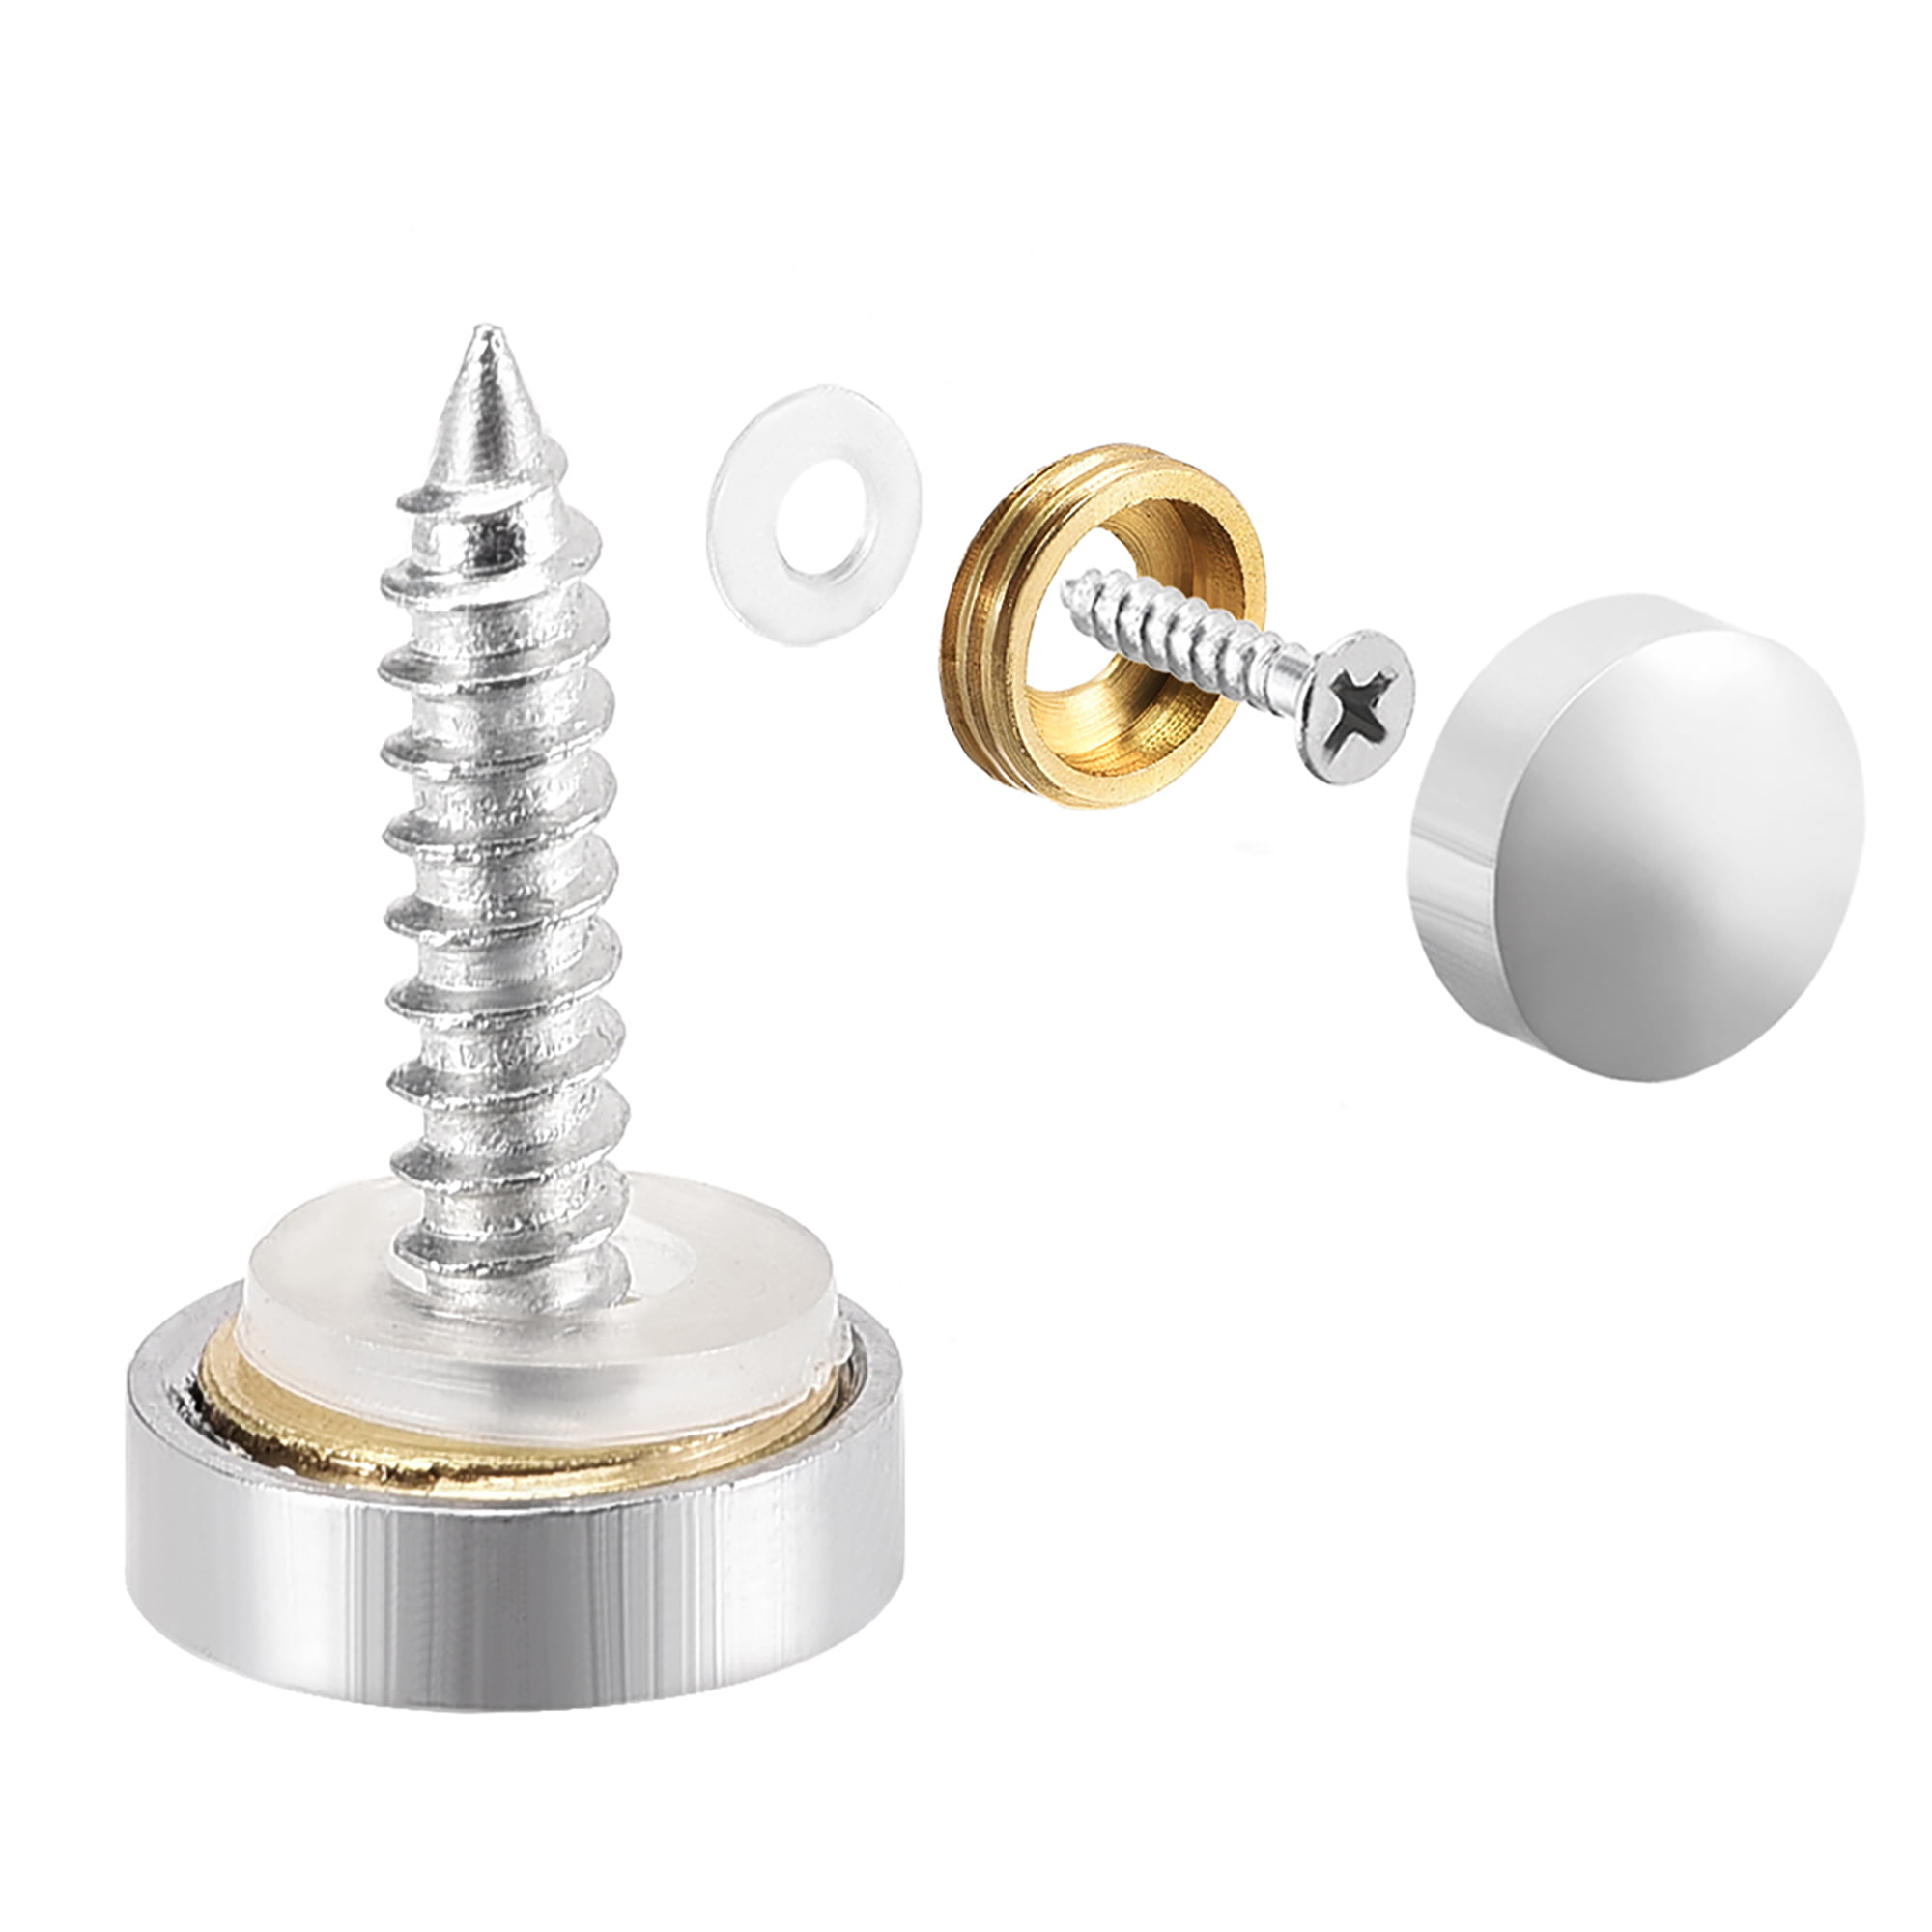 20mm COPPER DOME ELECTROPLATED MIRROR SCREW CAPS THREADED STAINLESS STEEL 